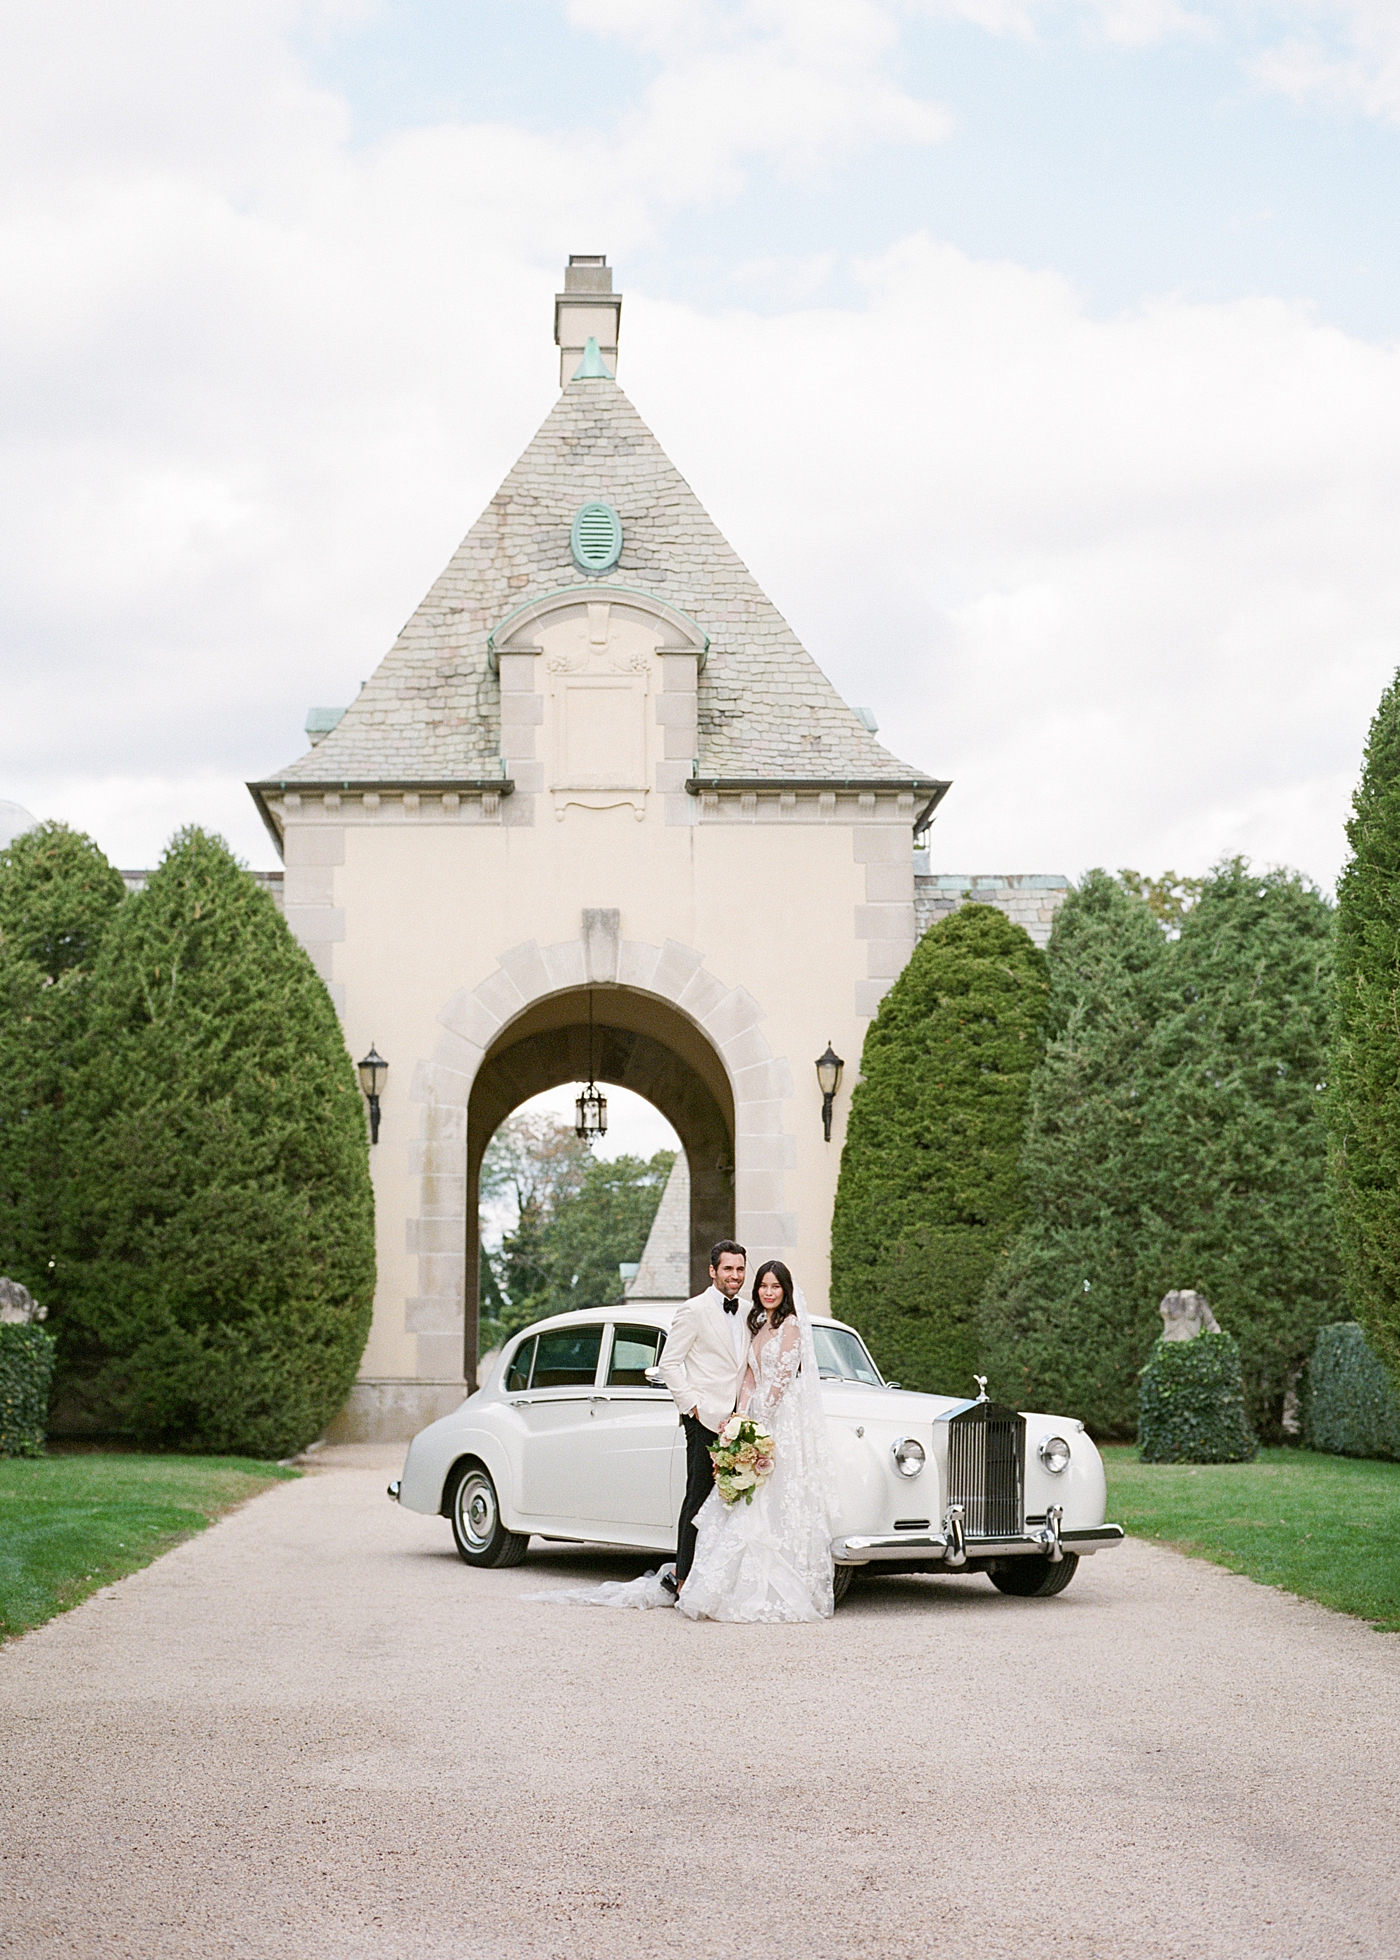 Bride and groom leaning on a classic car in a gravel driveway during Oheka castle wedding | Image by Hope Helmuth Photography